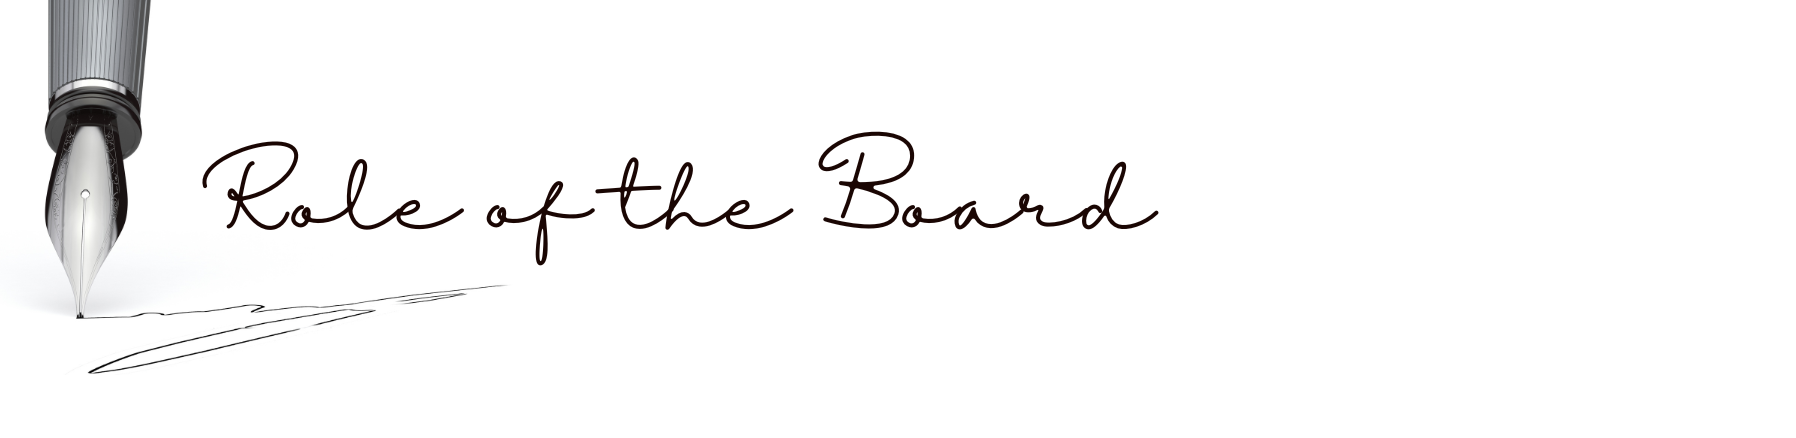 Role of the Board | FCS Blog Header